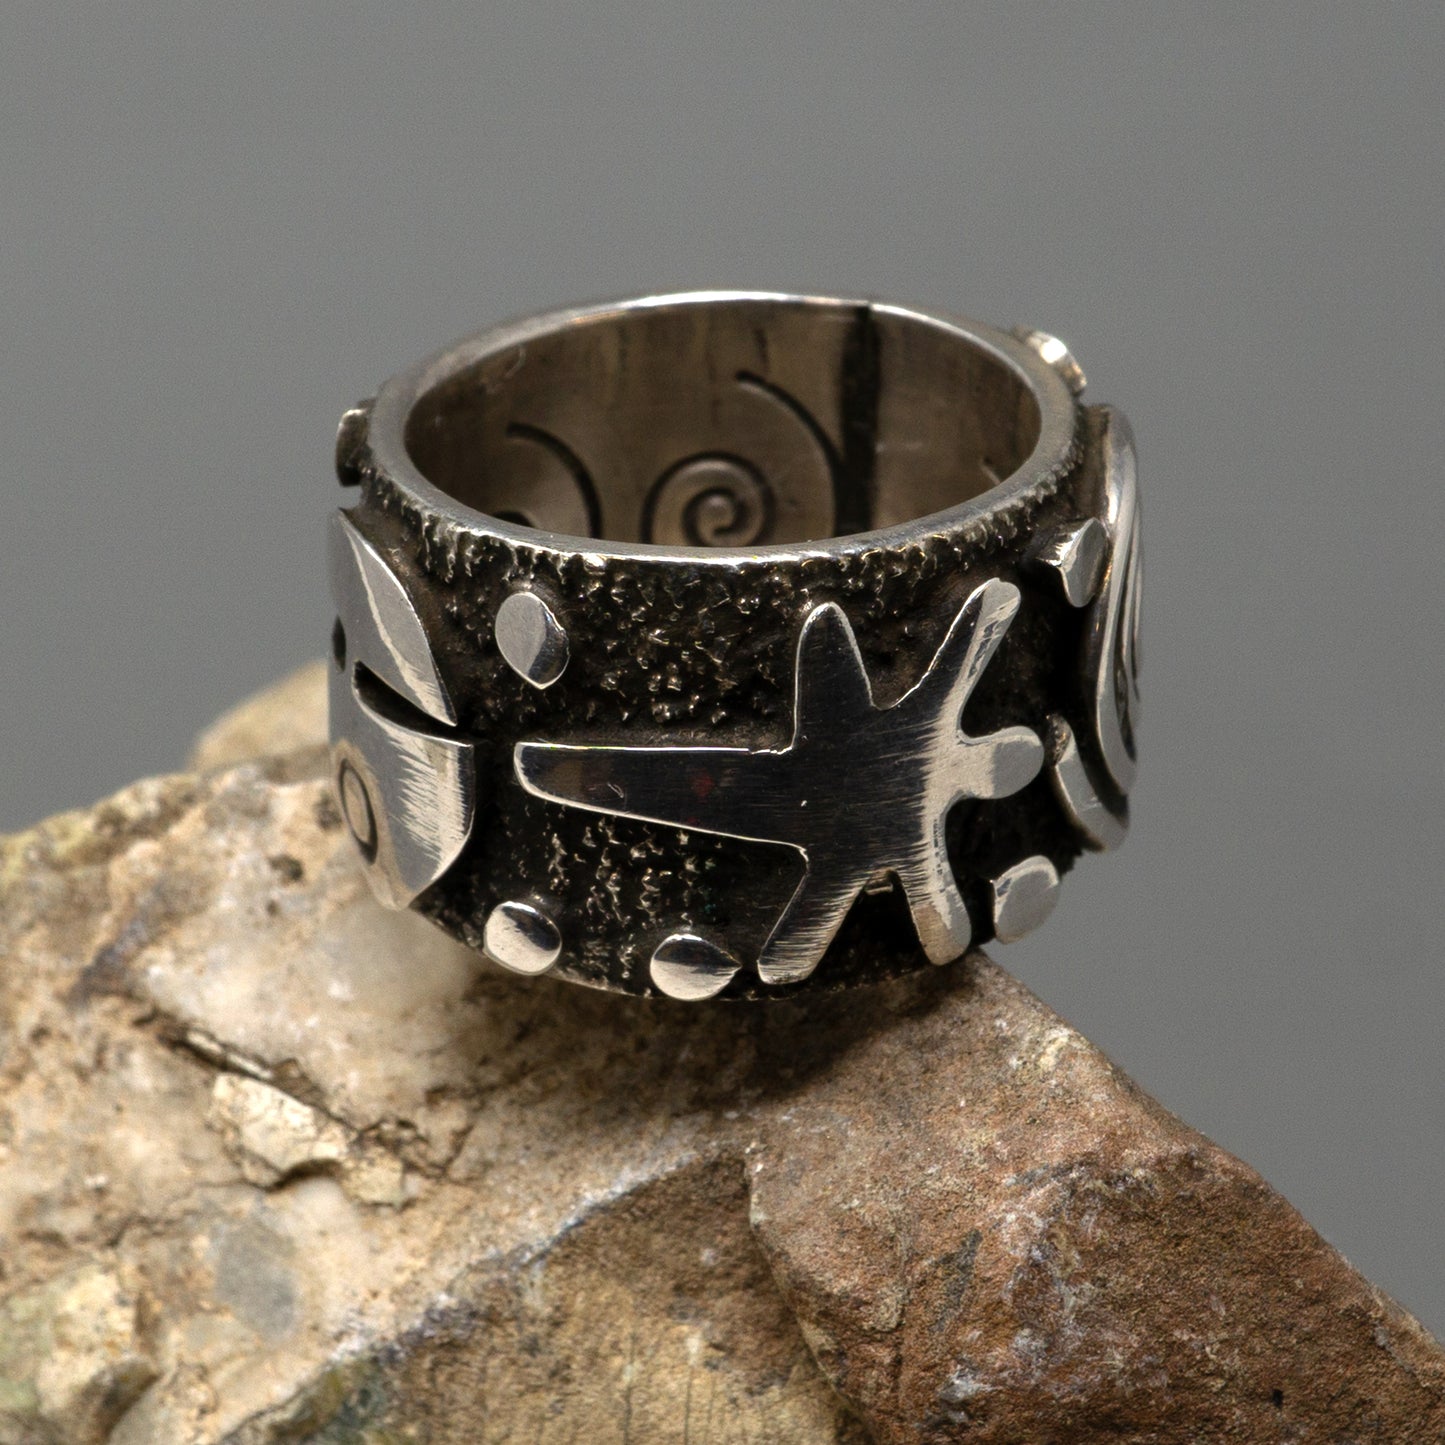 Sterling Silver Overlay Ring with spiral, hand and face designs | Alex Sanchez